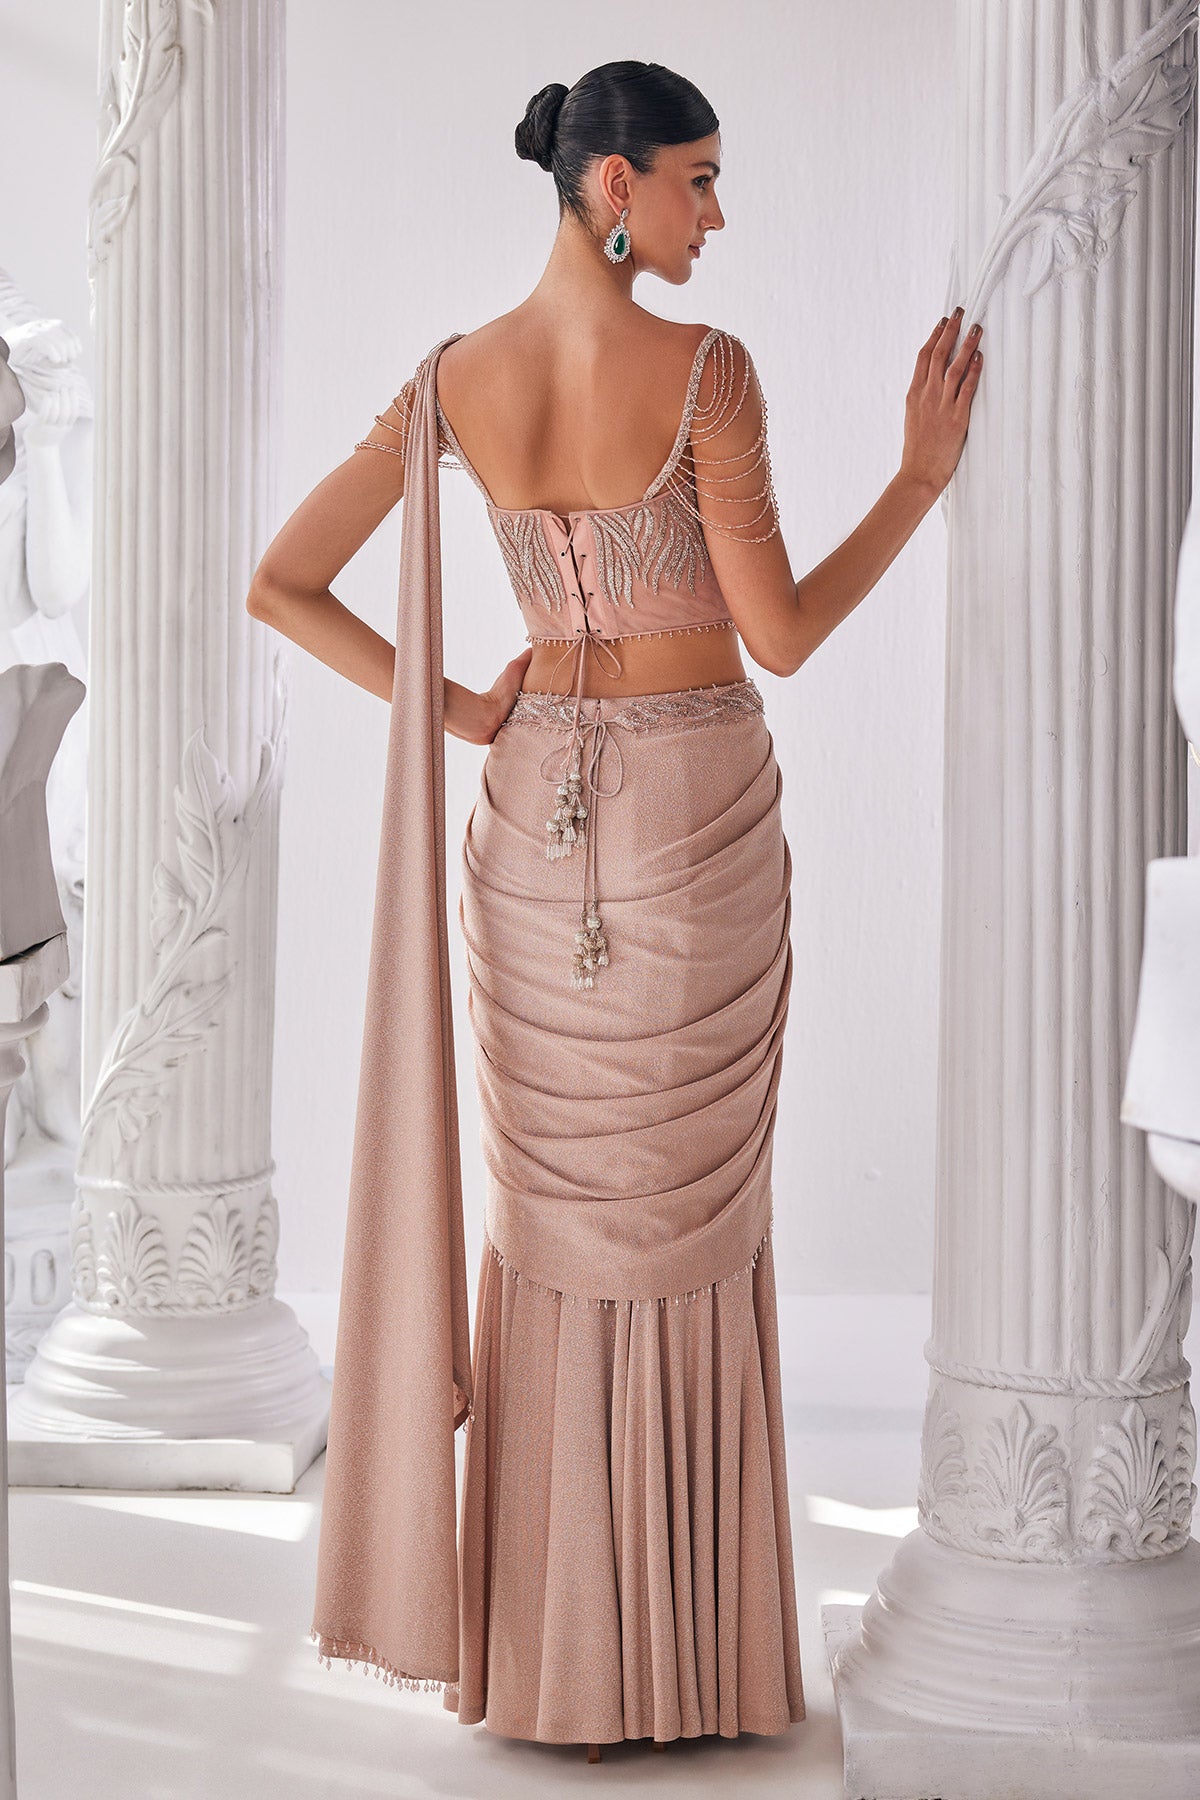 Peach Draped Saree In Luxurious Shimmer Lyrcra. It Is Paired With Anembroidered Corset Blouse And Highlighted With A Statement Belt.